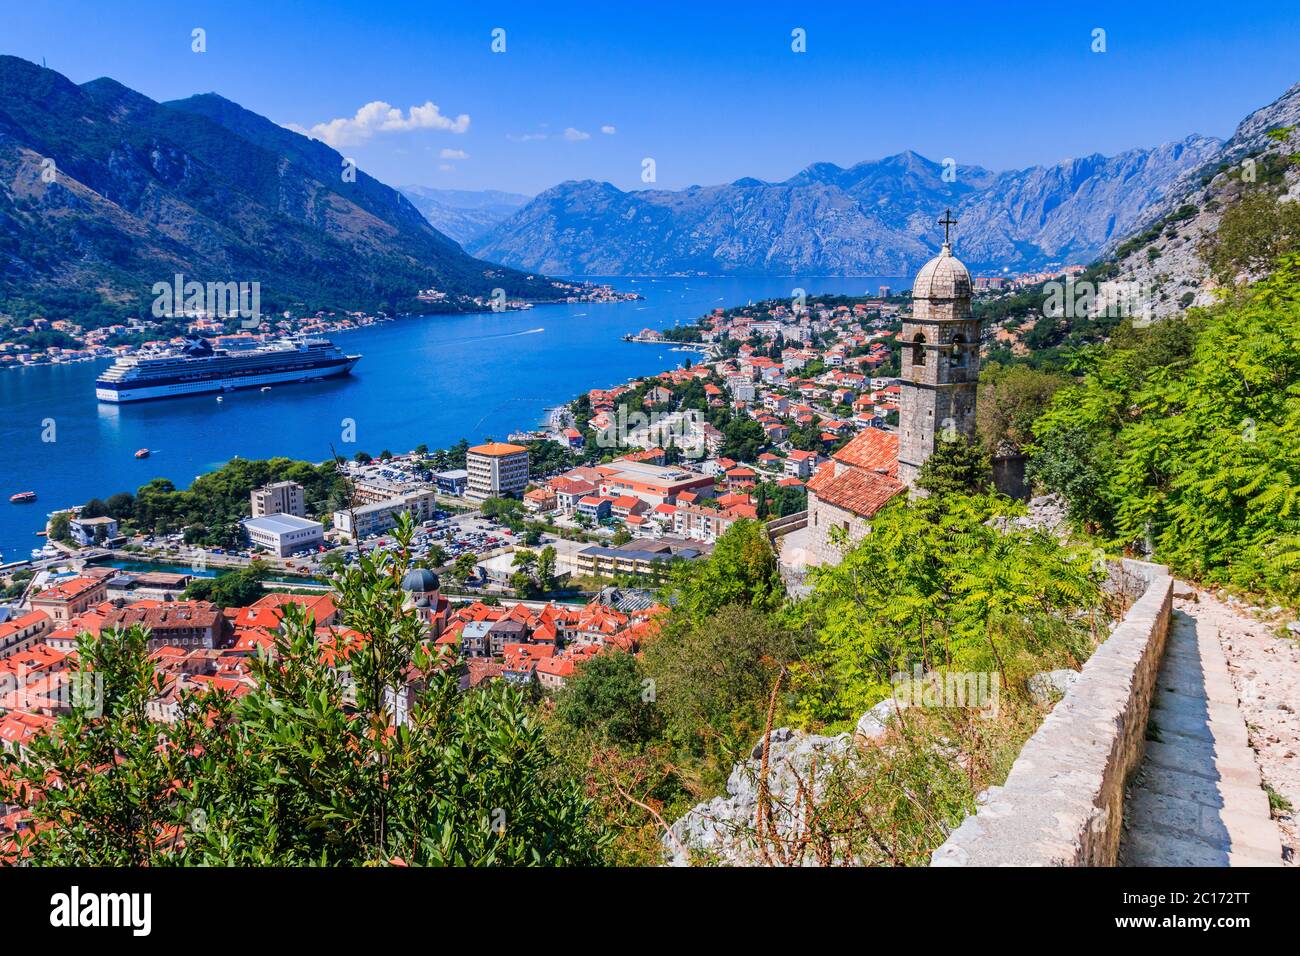 Kotor bay and Old Town from Lovcen Mountain. Kotor, Montenegro Stock Photo  - Alamy